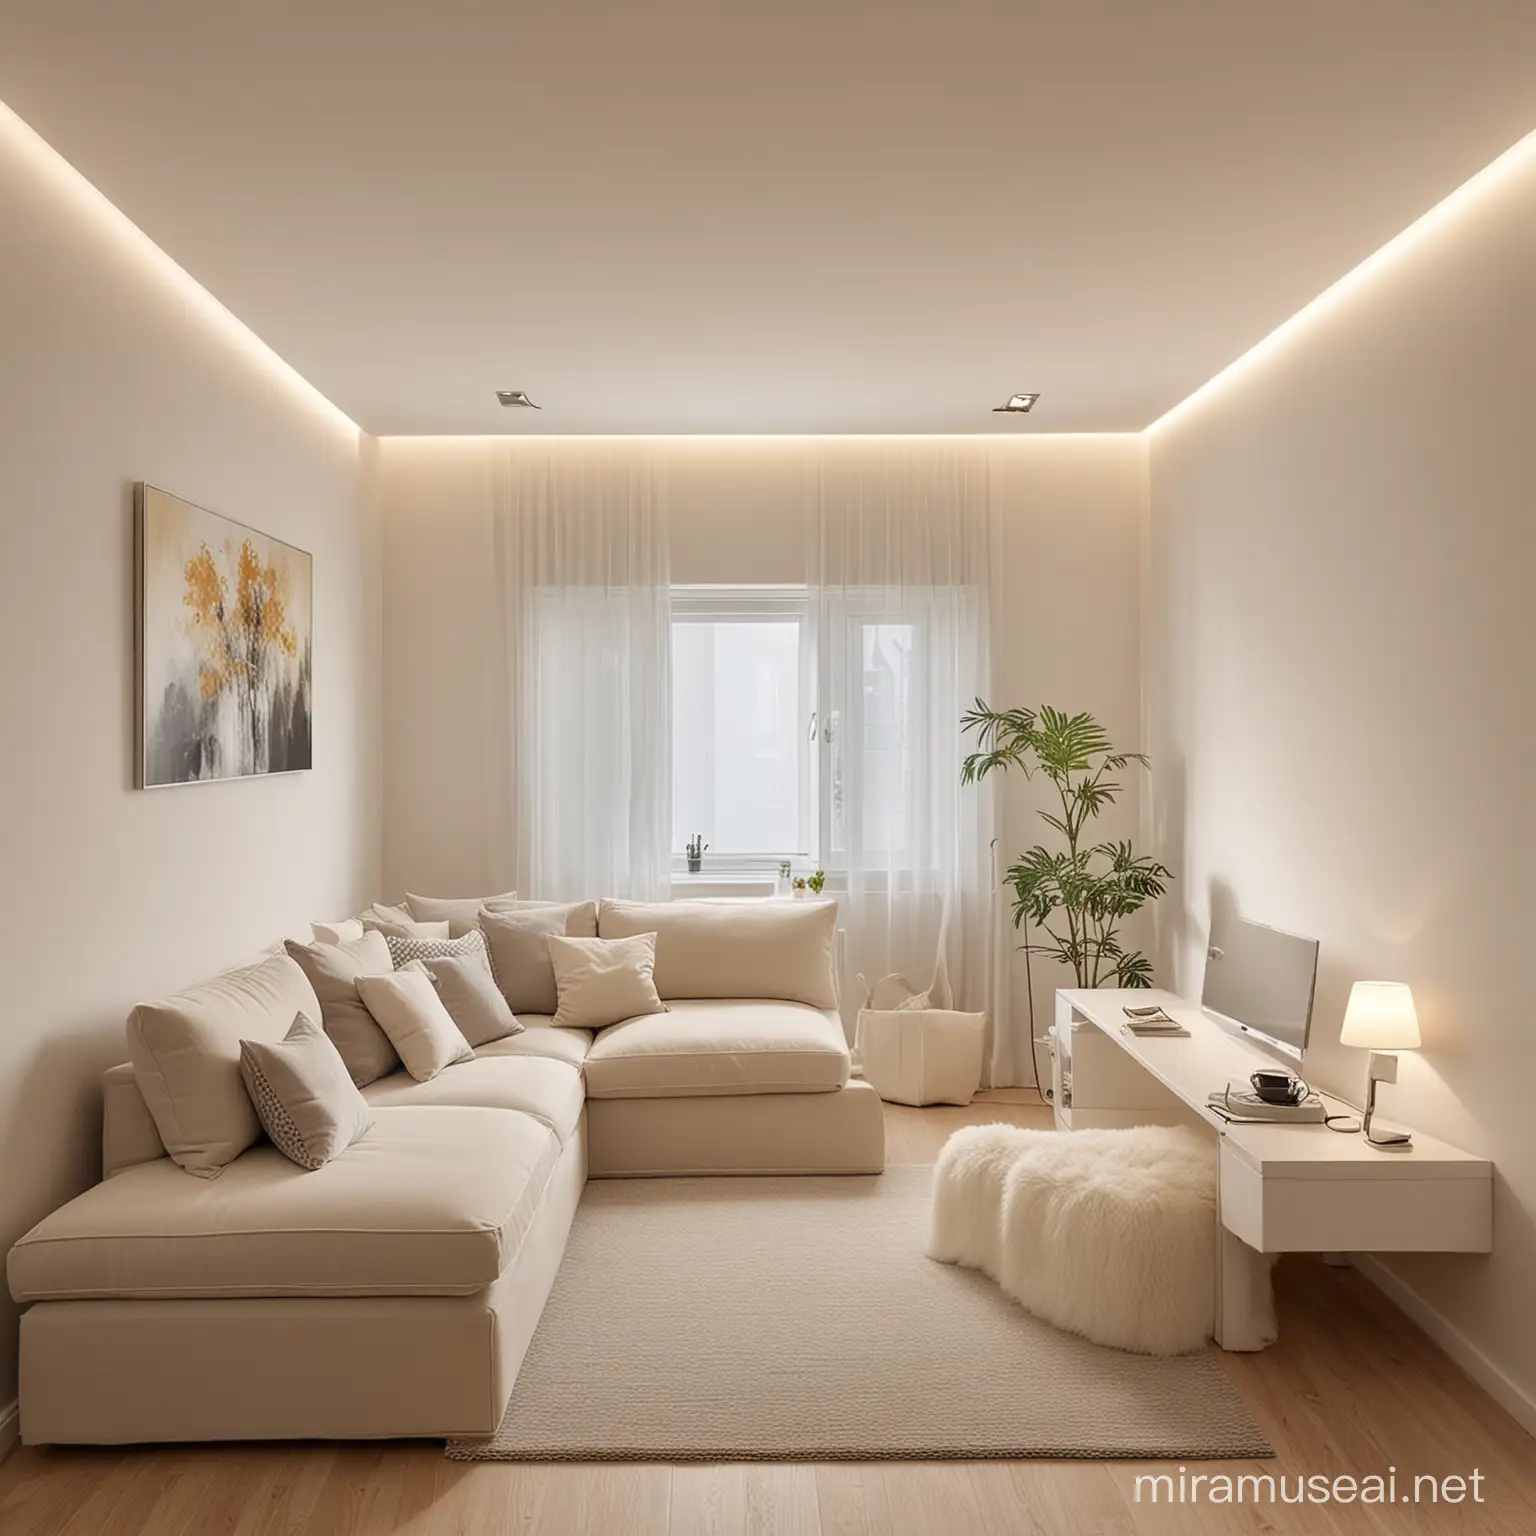 Cozy Small Room with Light Interior